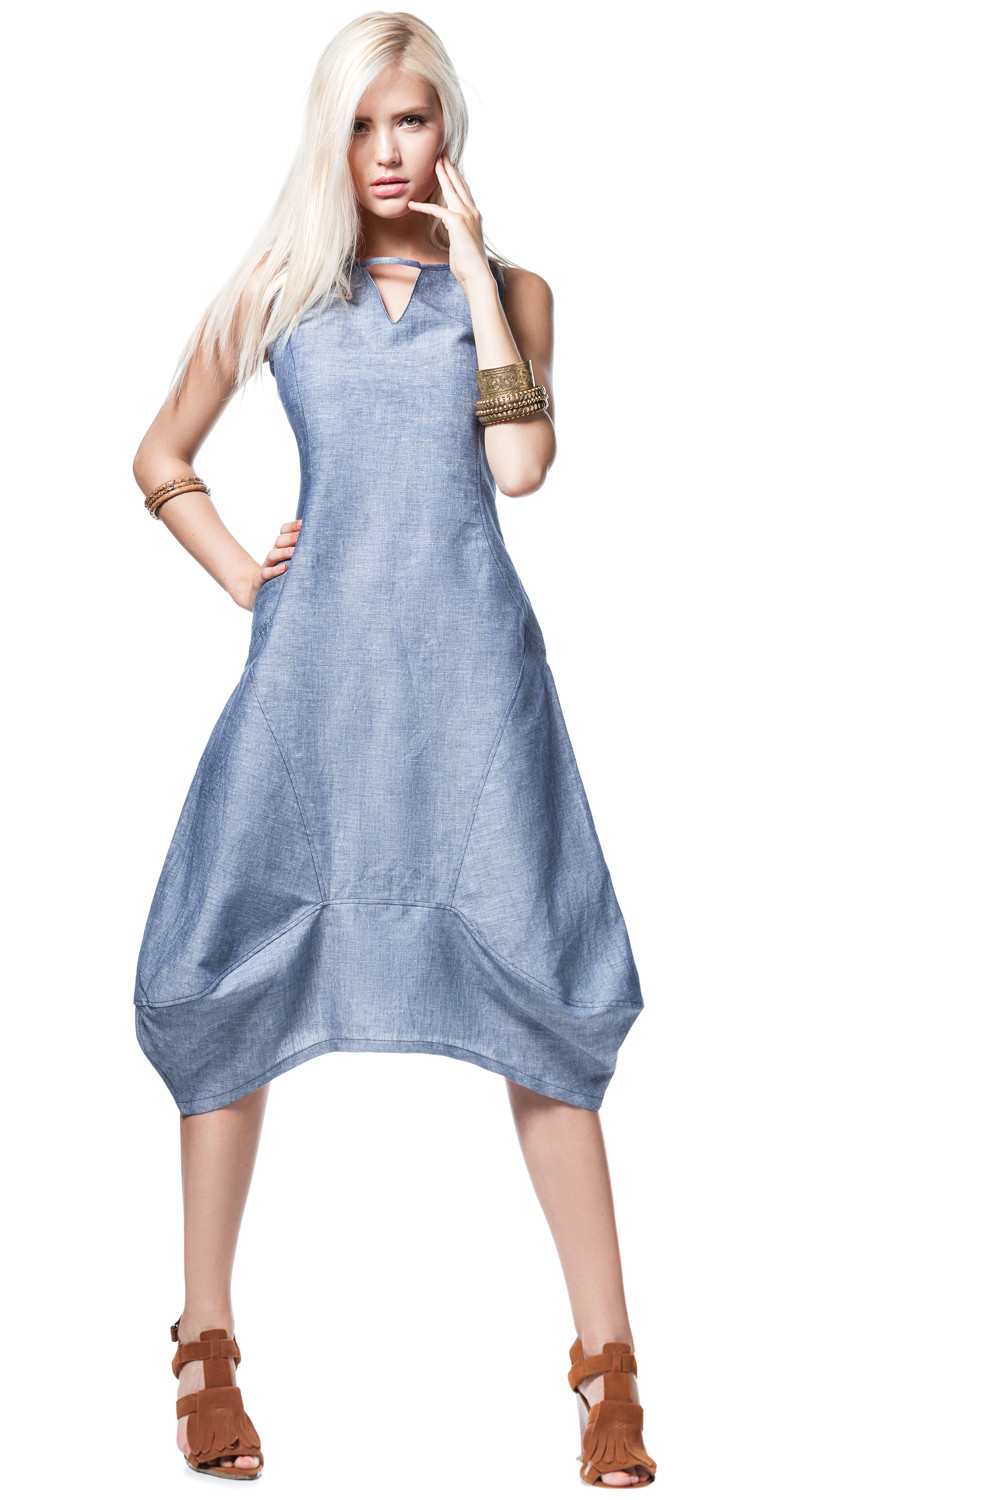 Maloka: Luxe Linen and Diamond Denim Tunic/Dress SOLD OUT